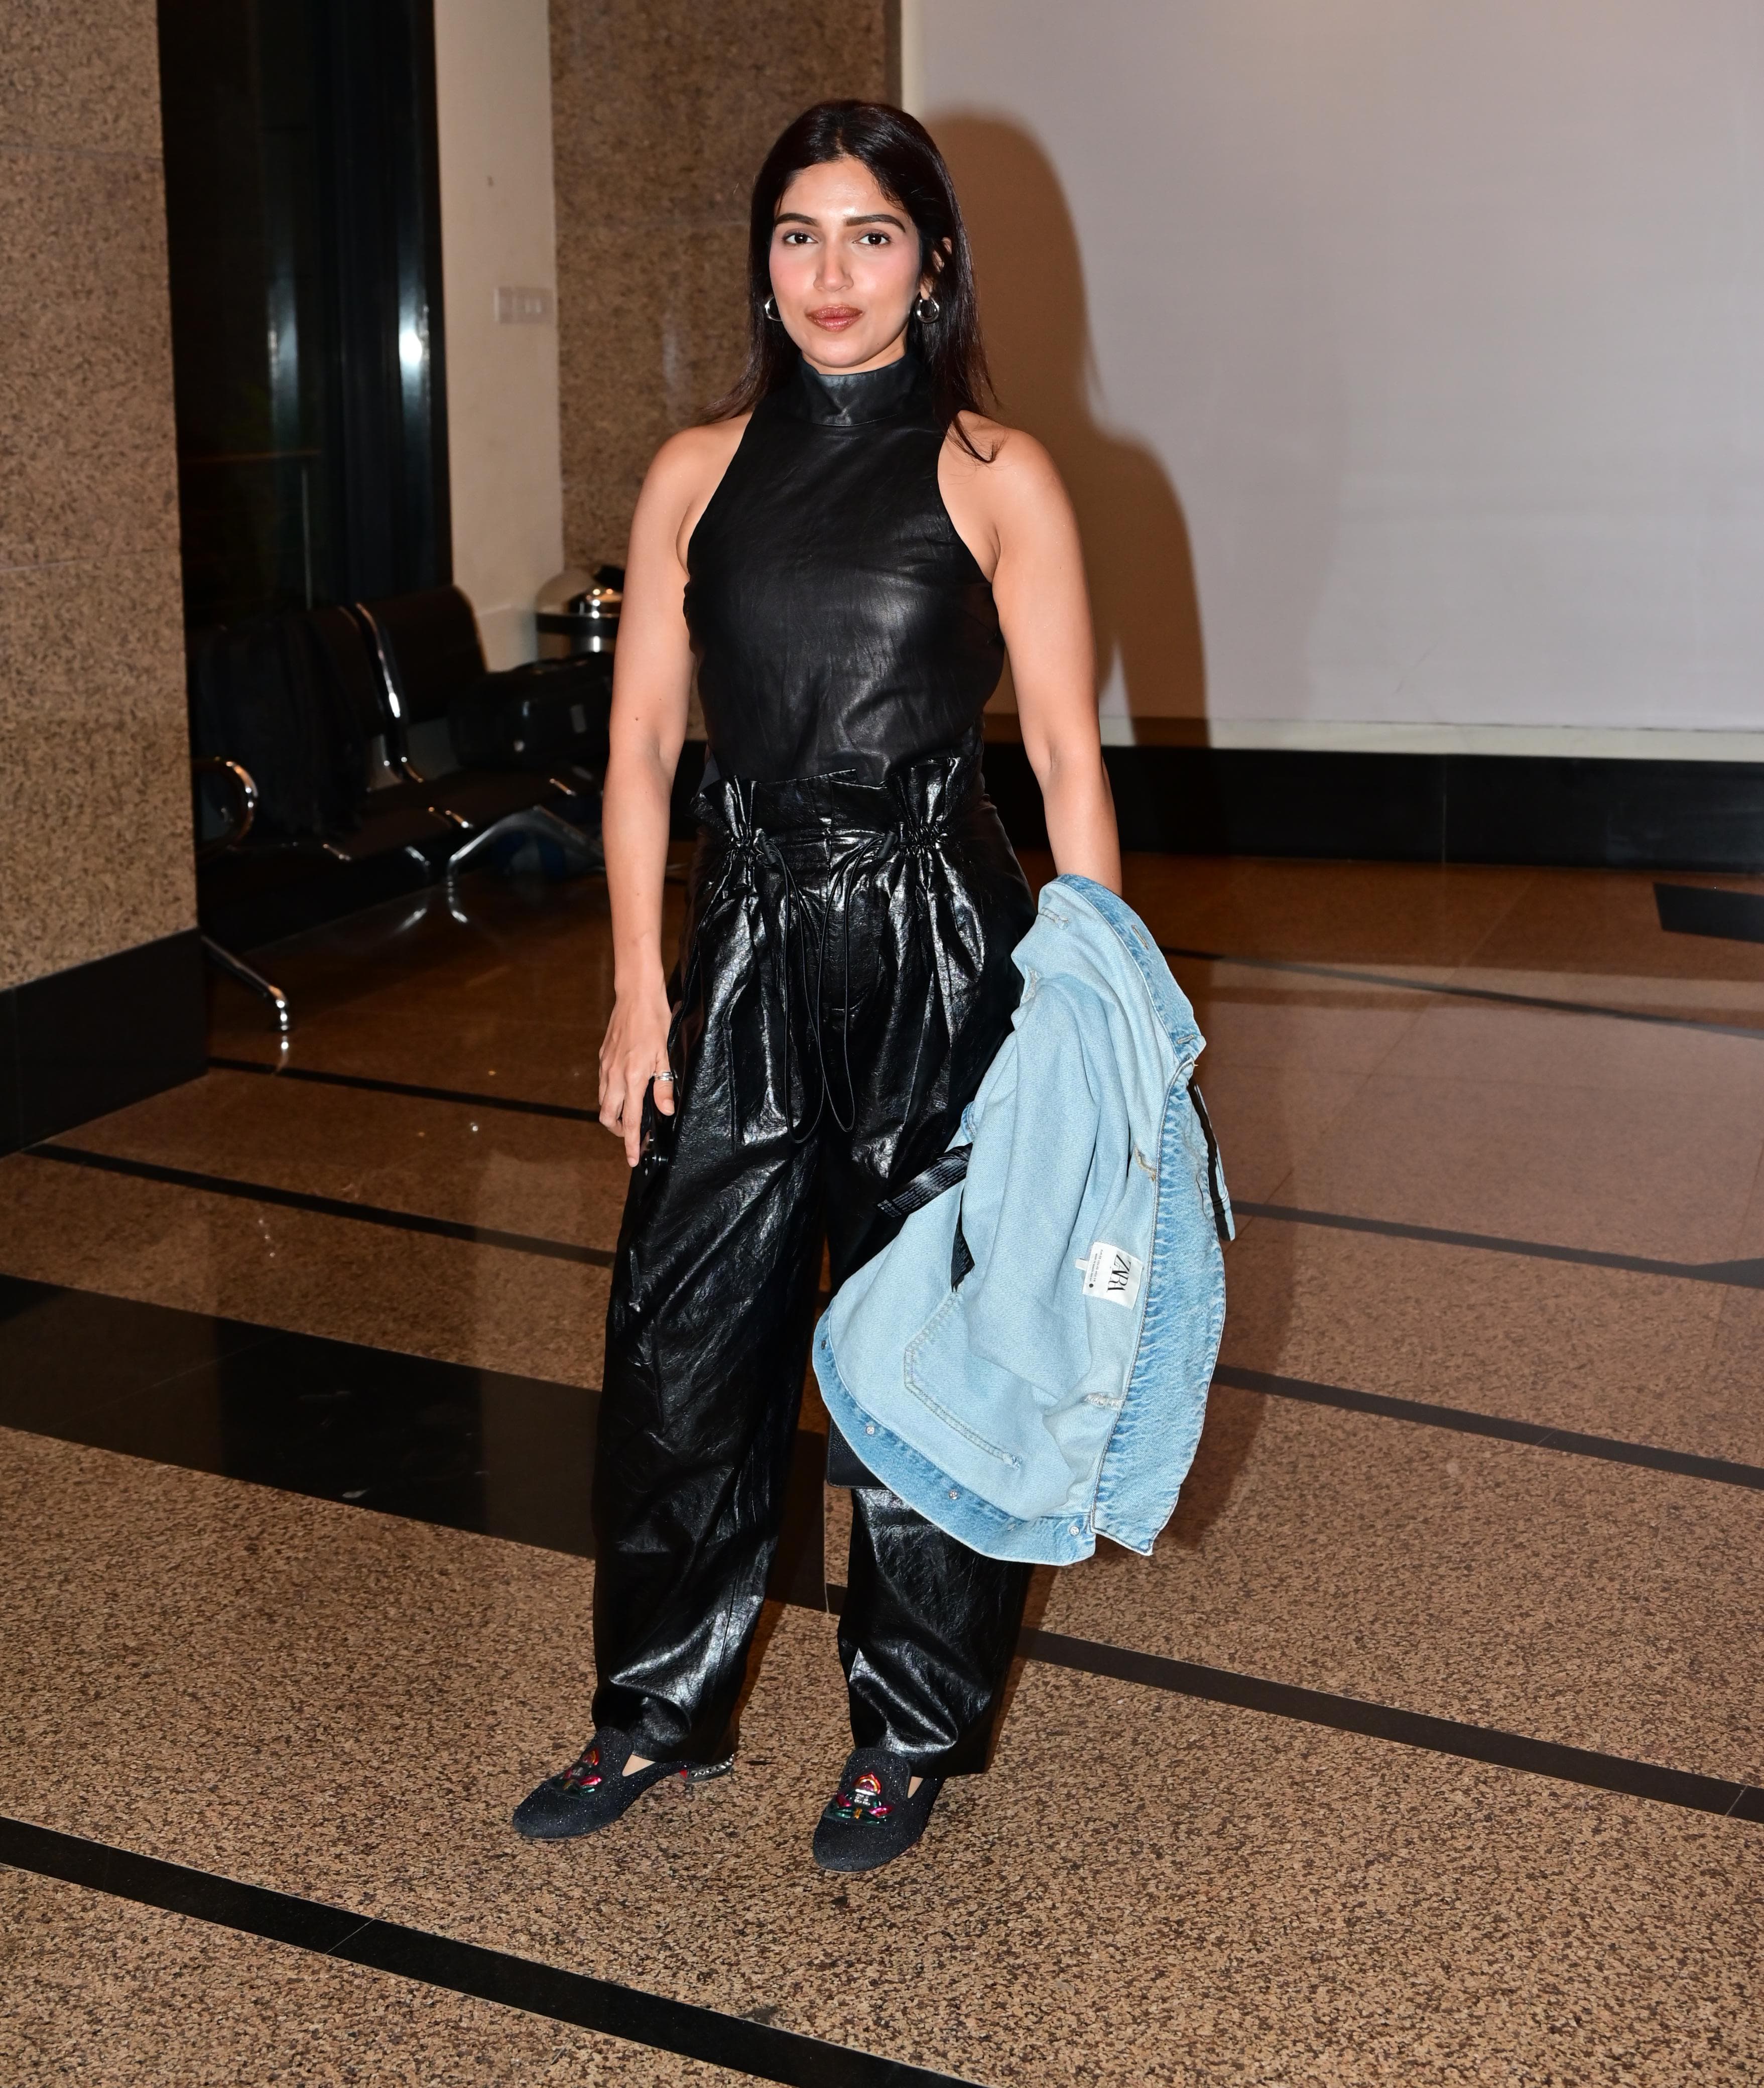 Bhumi Pednekar wore a shiny black outfit as she went out and about in the city